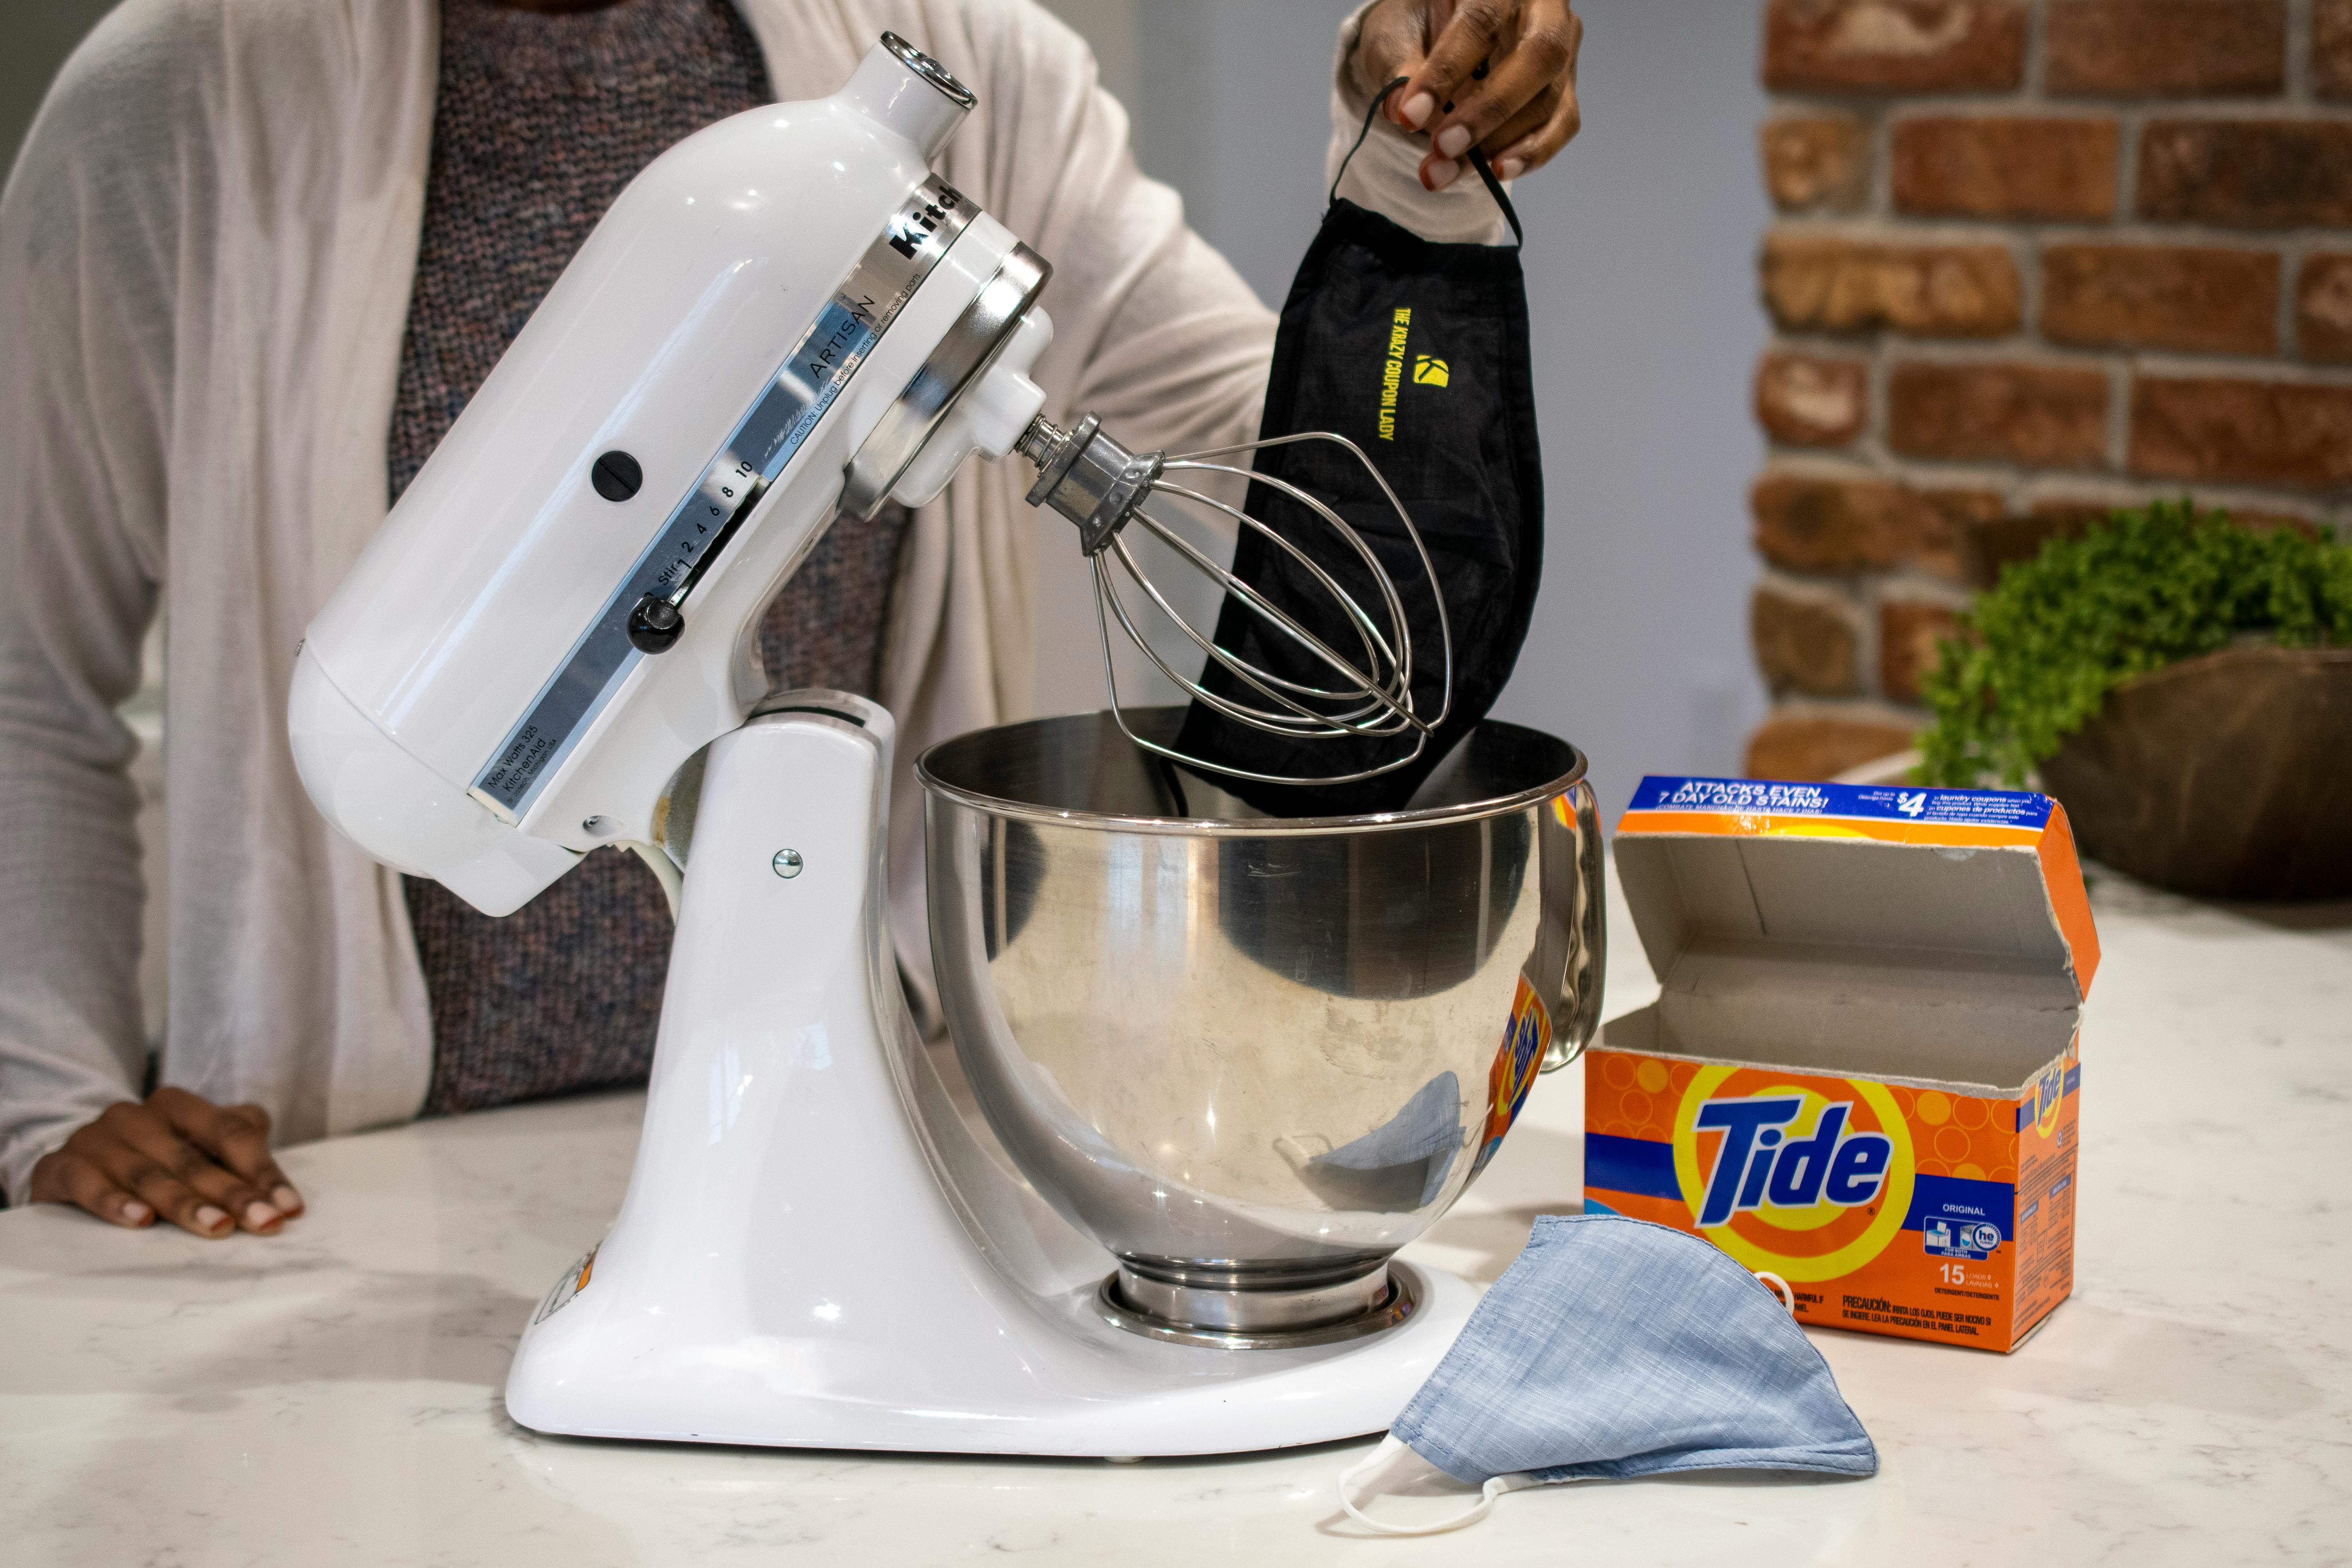 15 KitchenAid Mixer Hacks You Haven't Before - The Krazy Coupon Lady